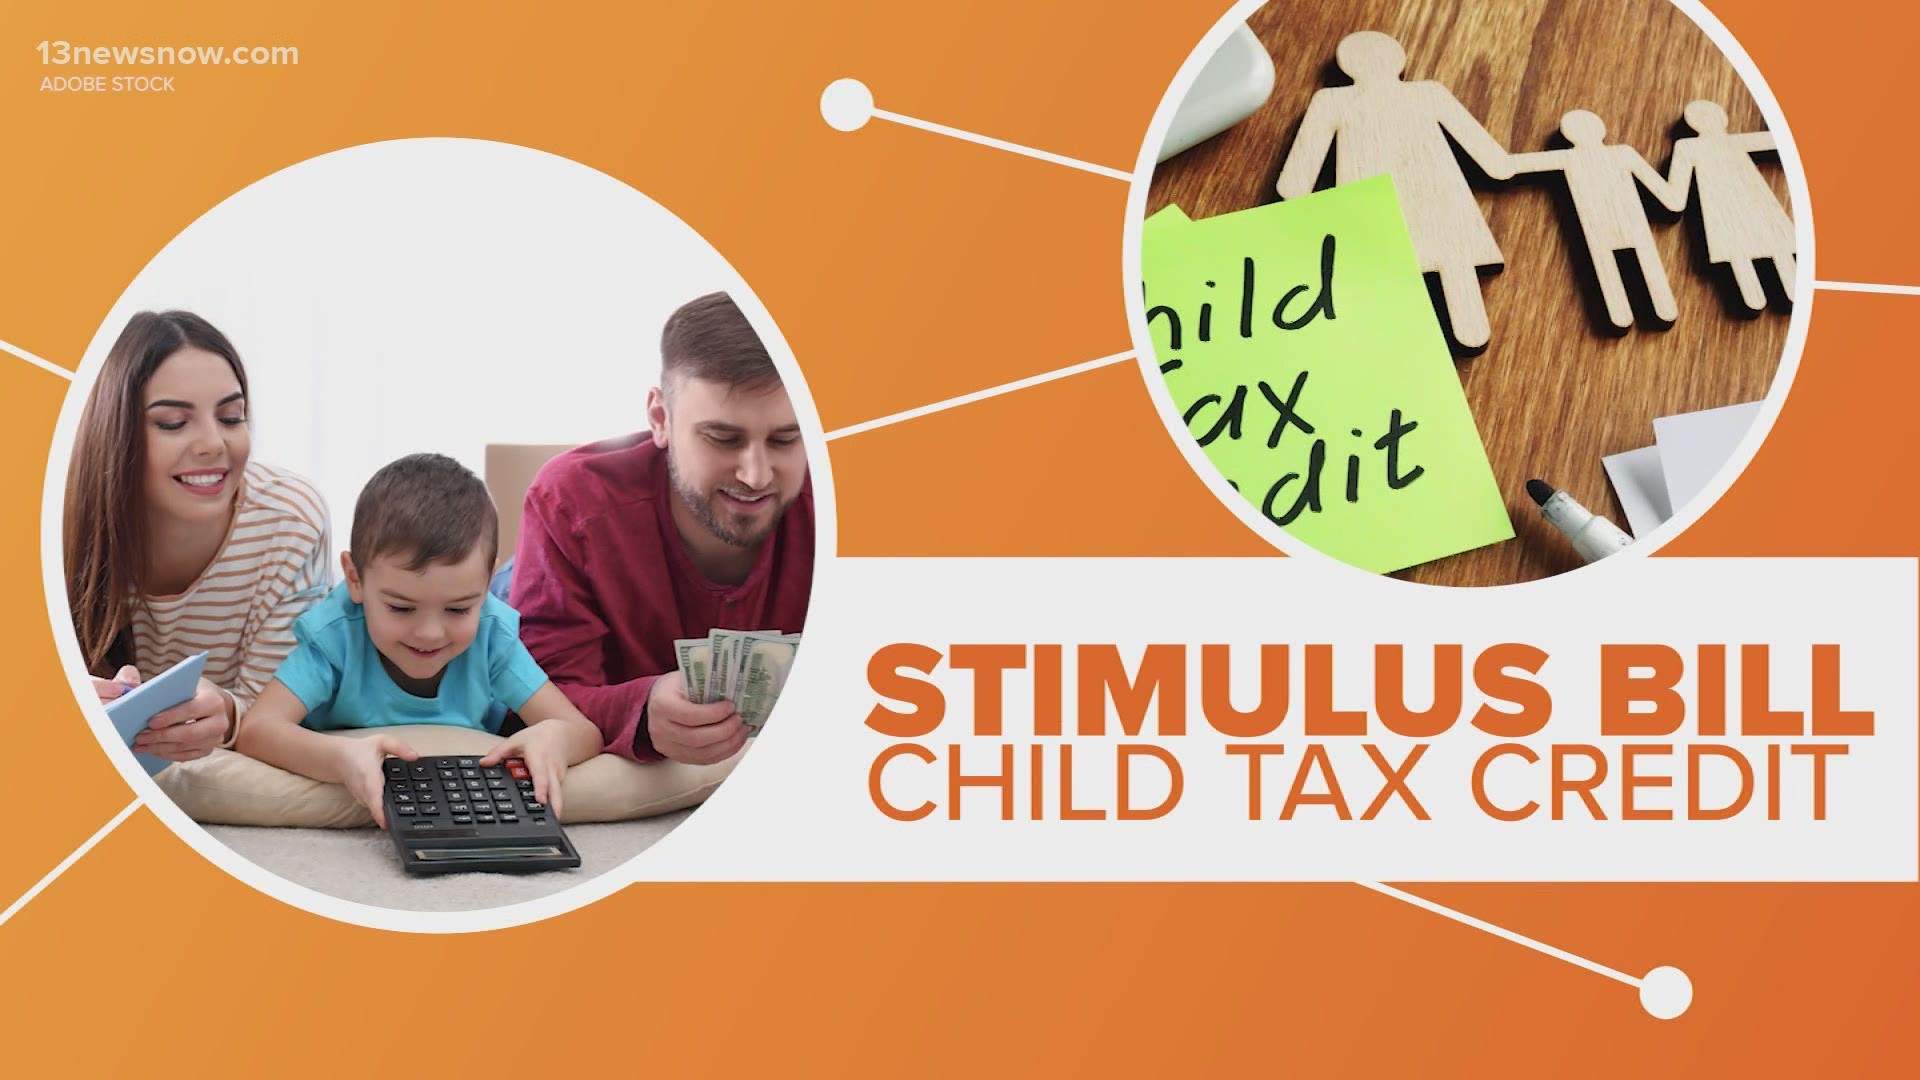 Connect the Dots: How does the child tax credit work in the new stimulus bill?